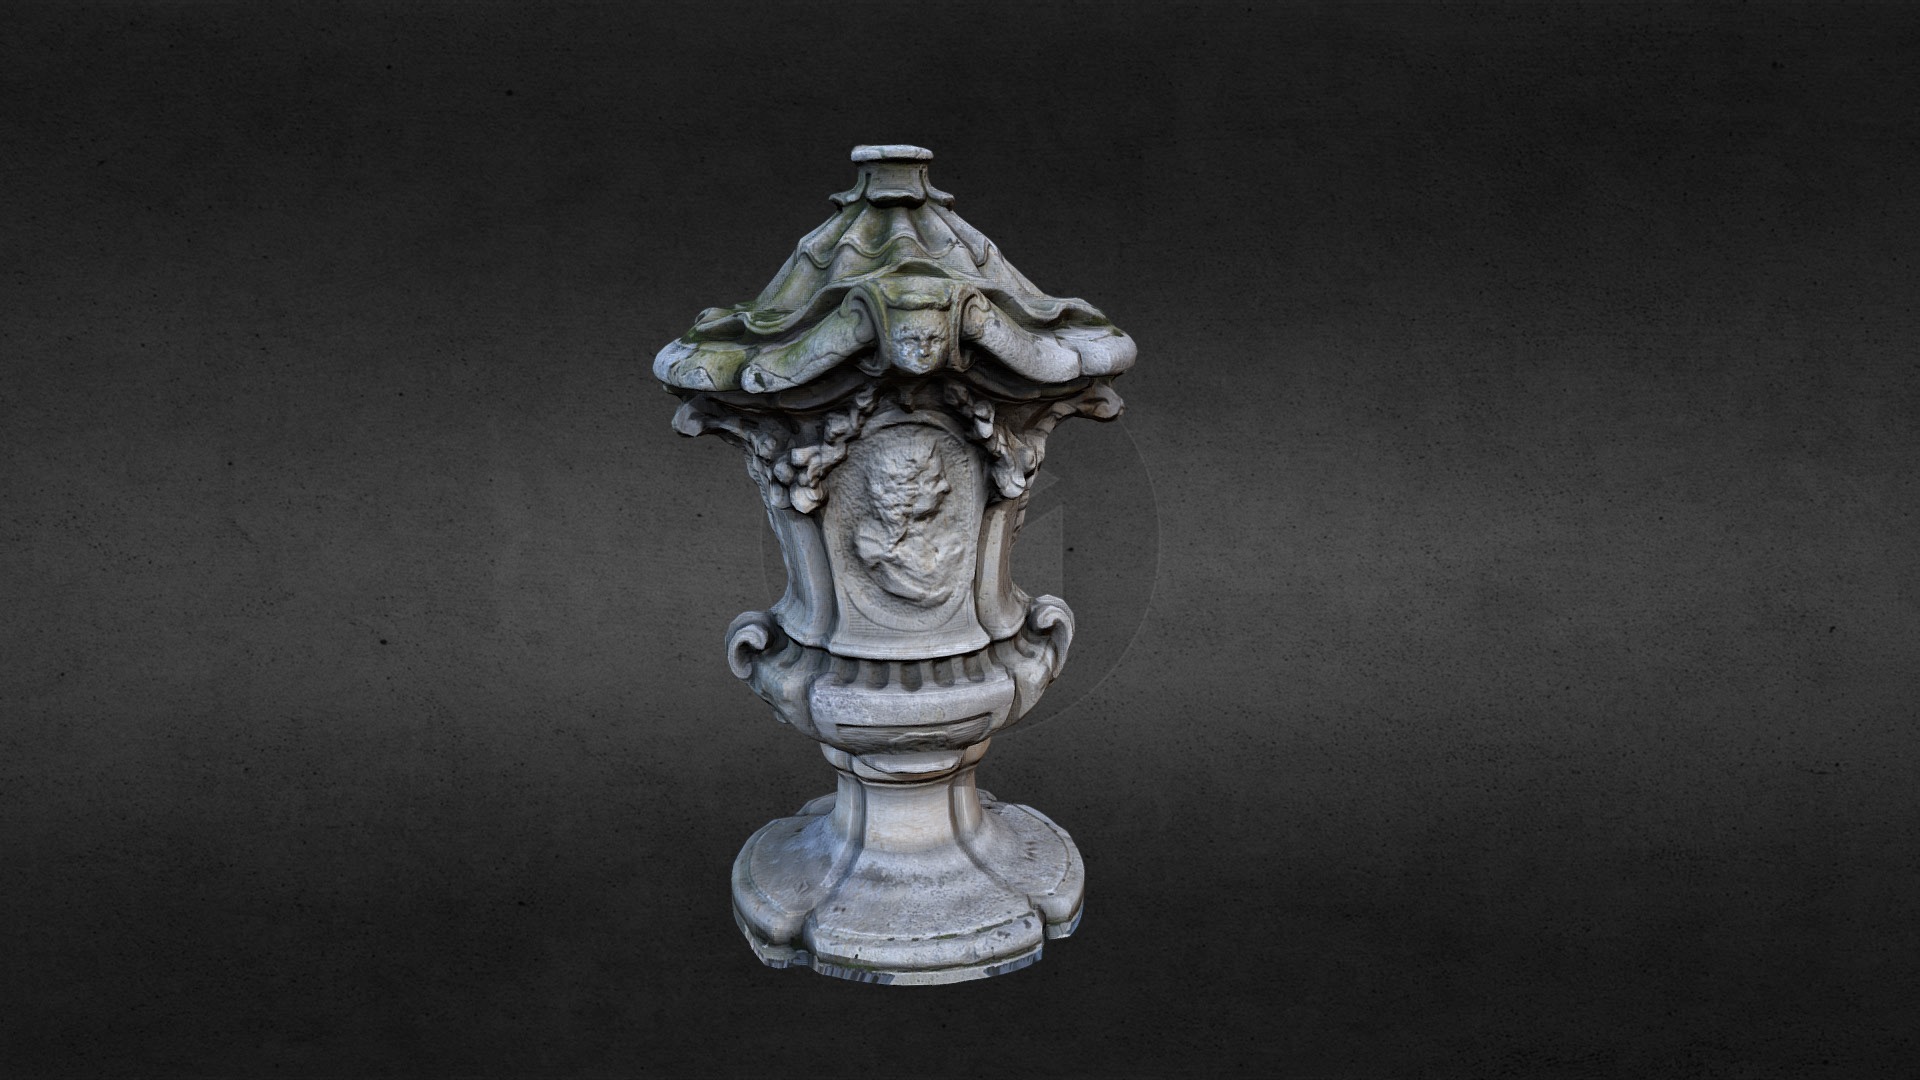 3D model Vase - This is a 3D model of the Vase. The 3D model is about a metal object with a design on it.